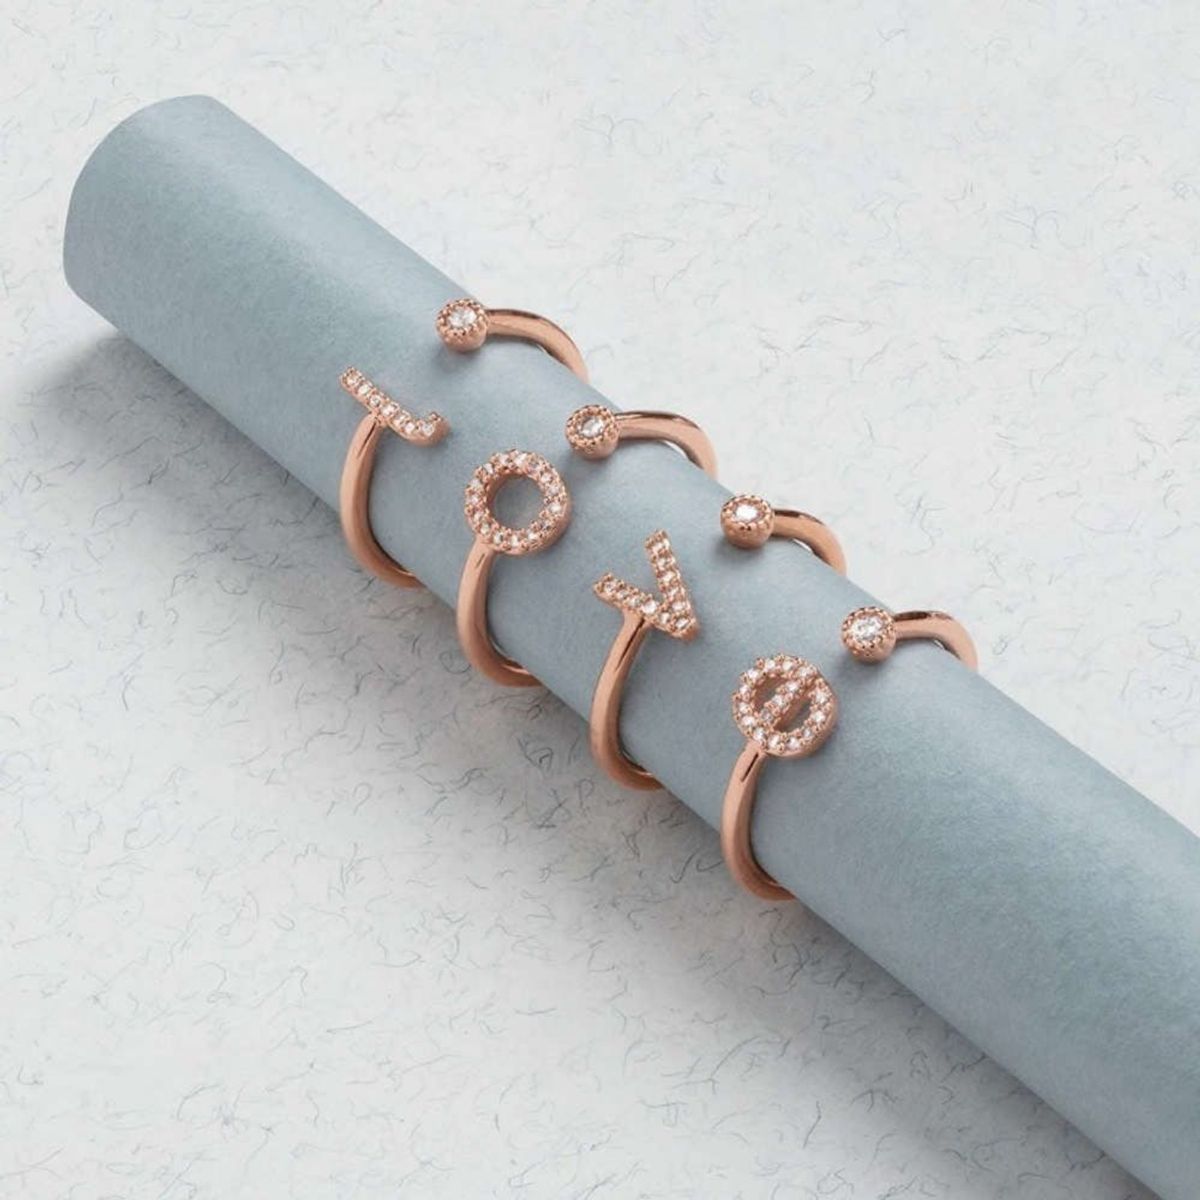 Friendship Rings Are Here to Replace Friendship Bracelets This Galentine’s Day